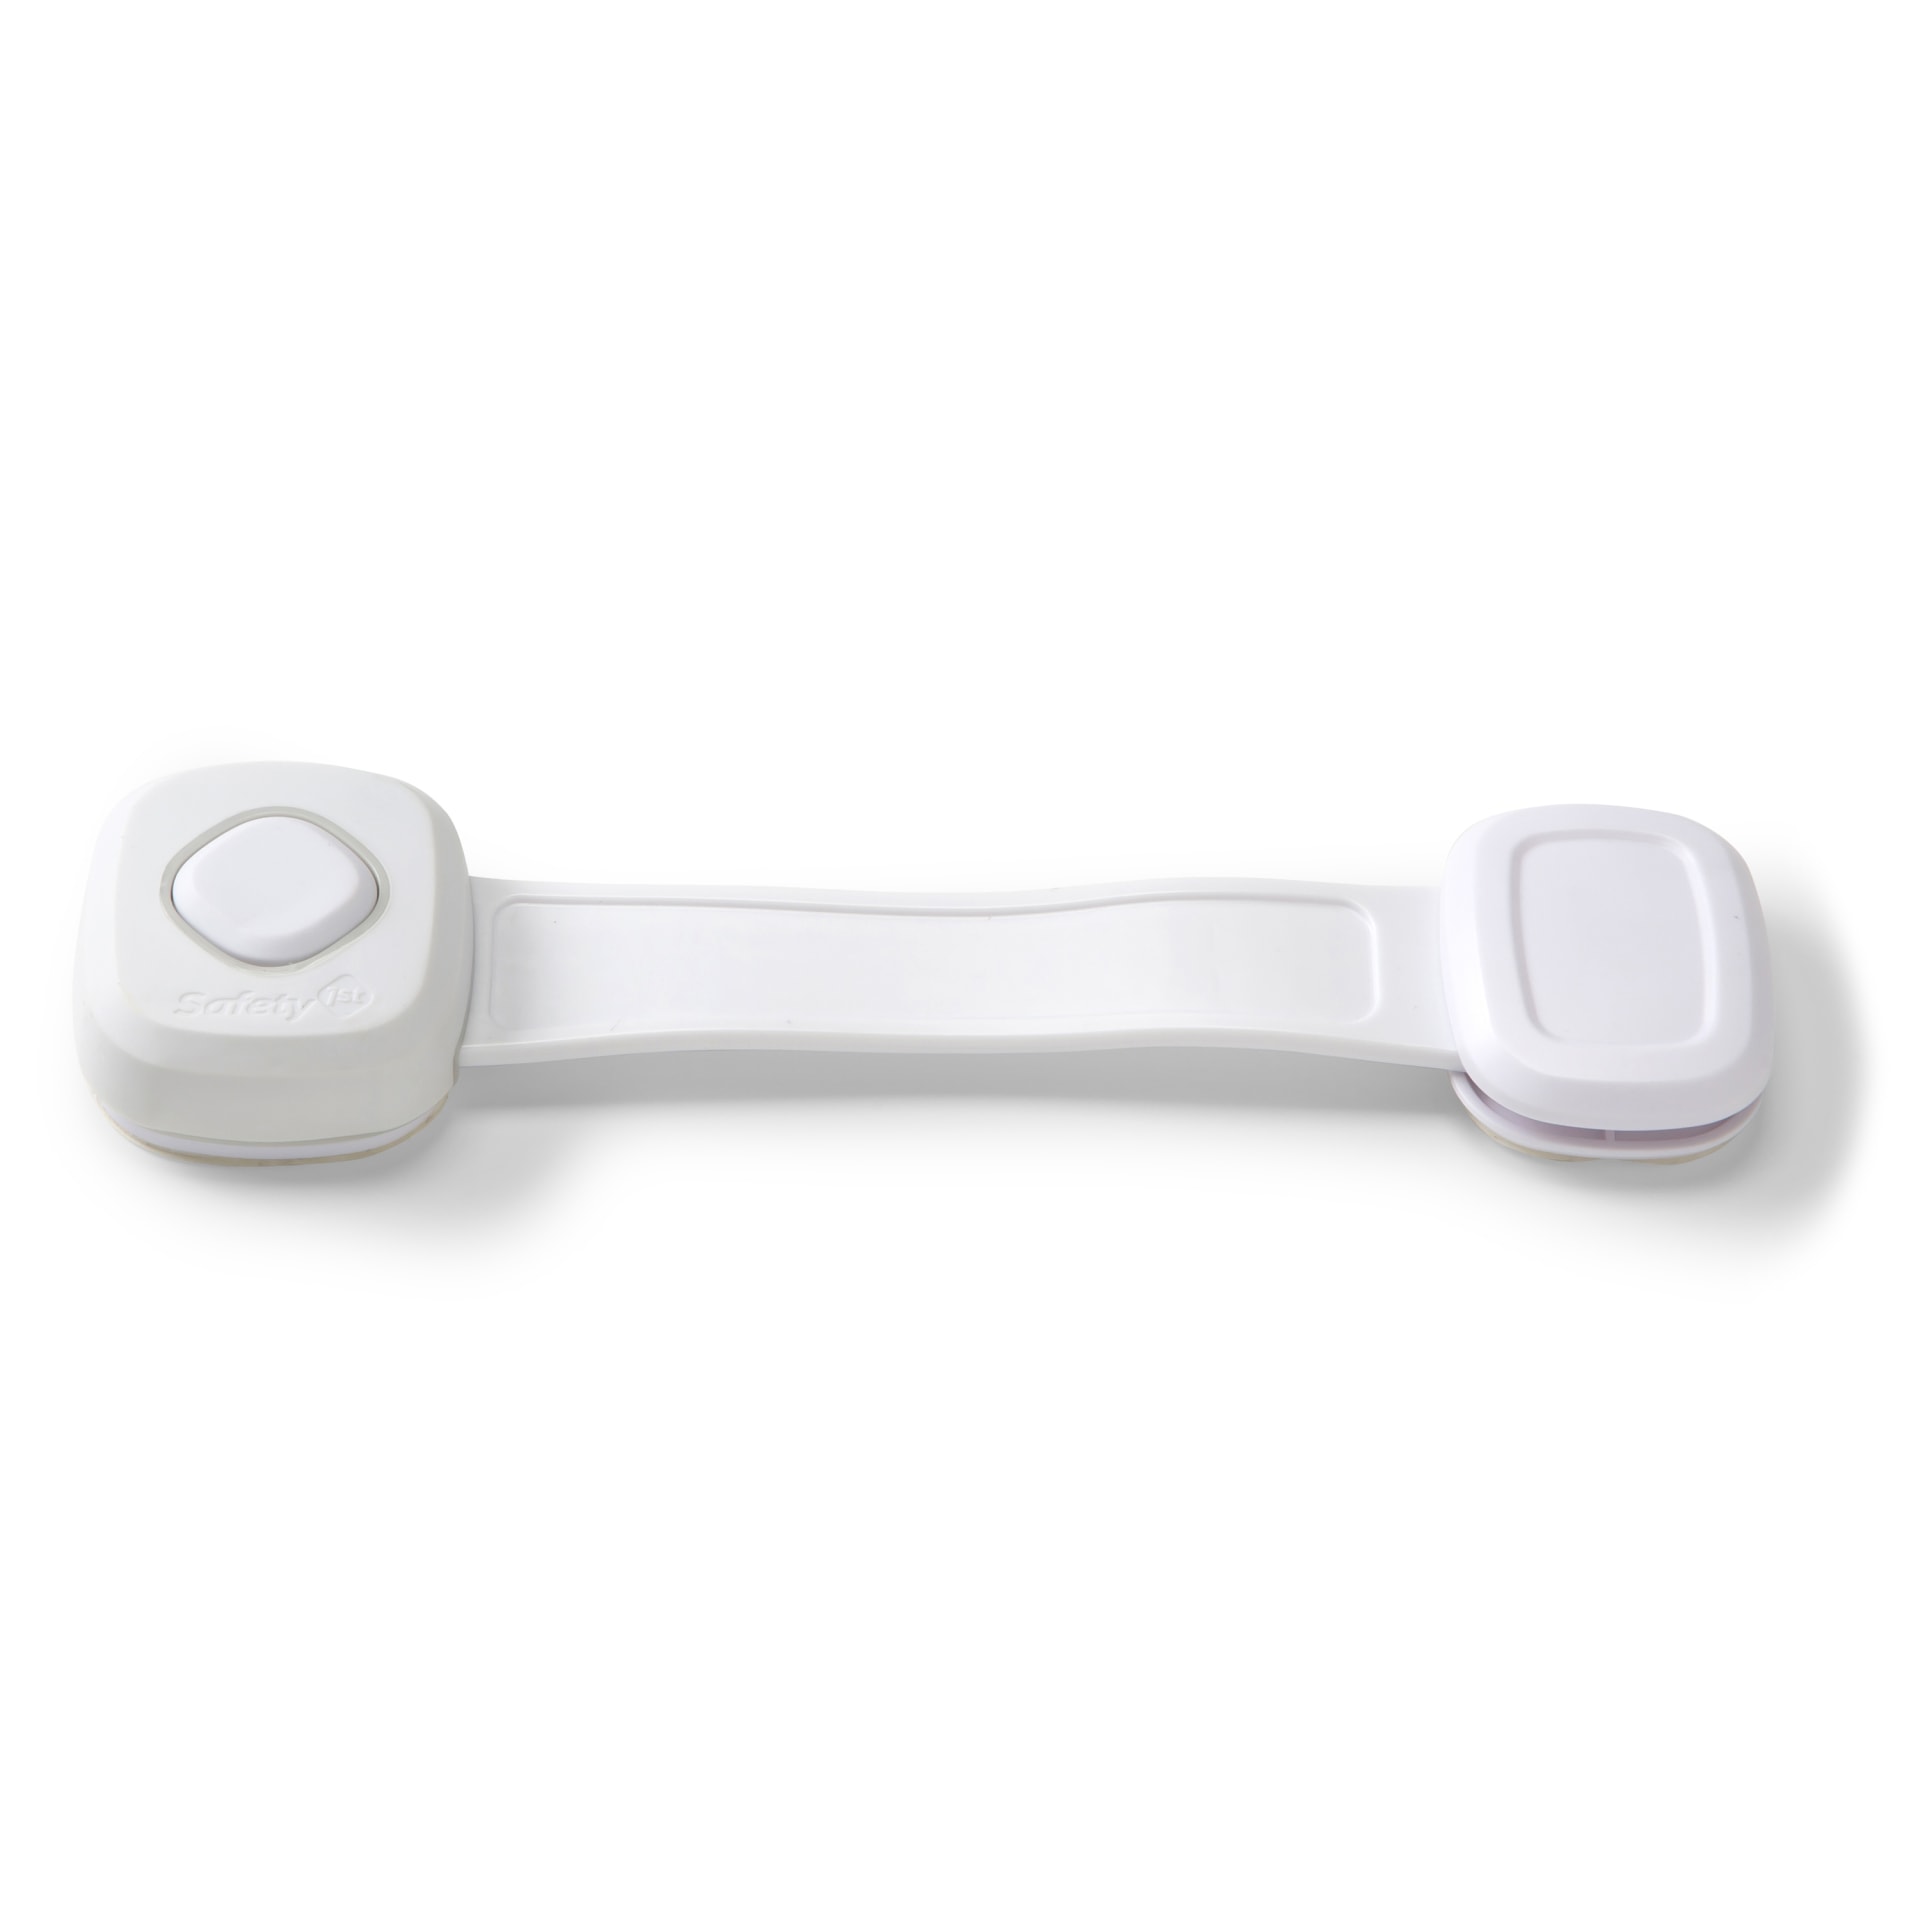 Safety 1st OutSmart Toilet Lock, White, 1 Count (Pack of 1)